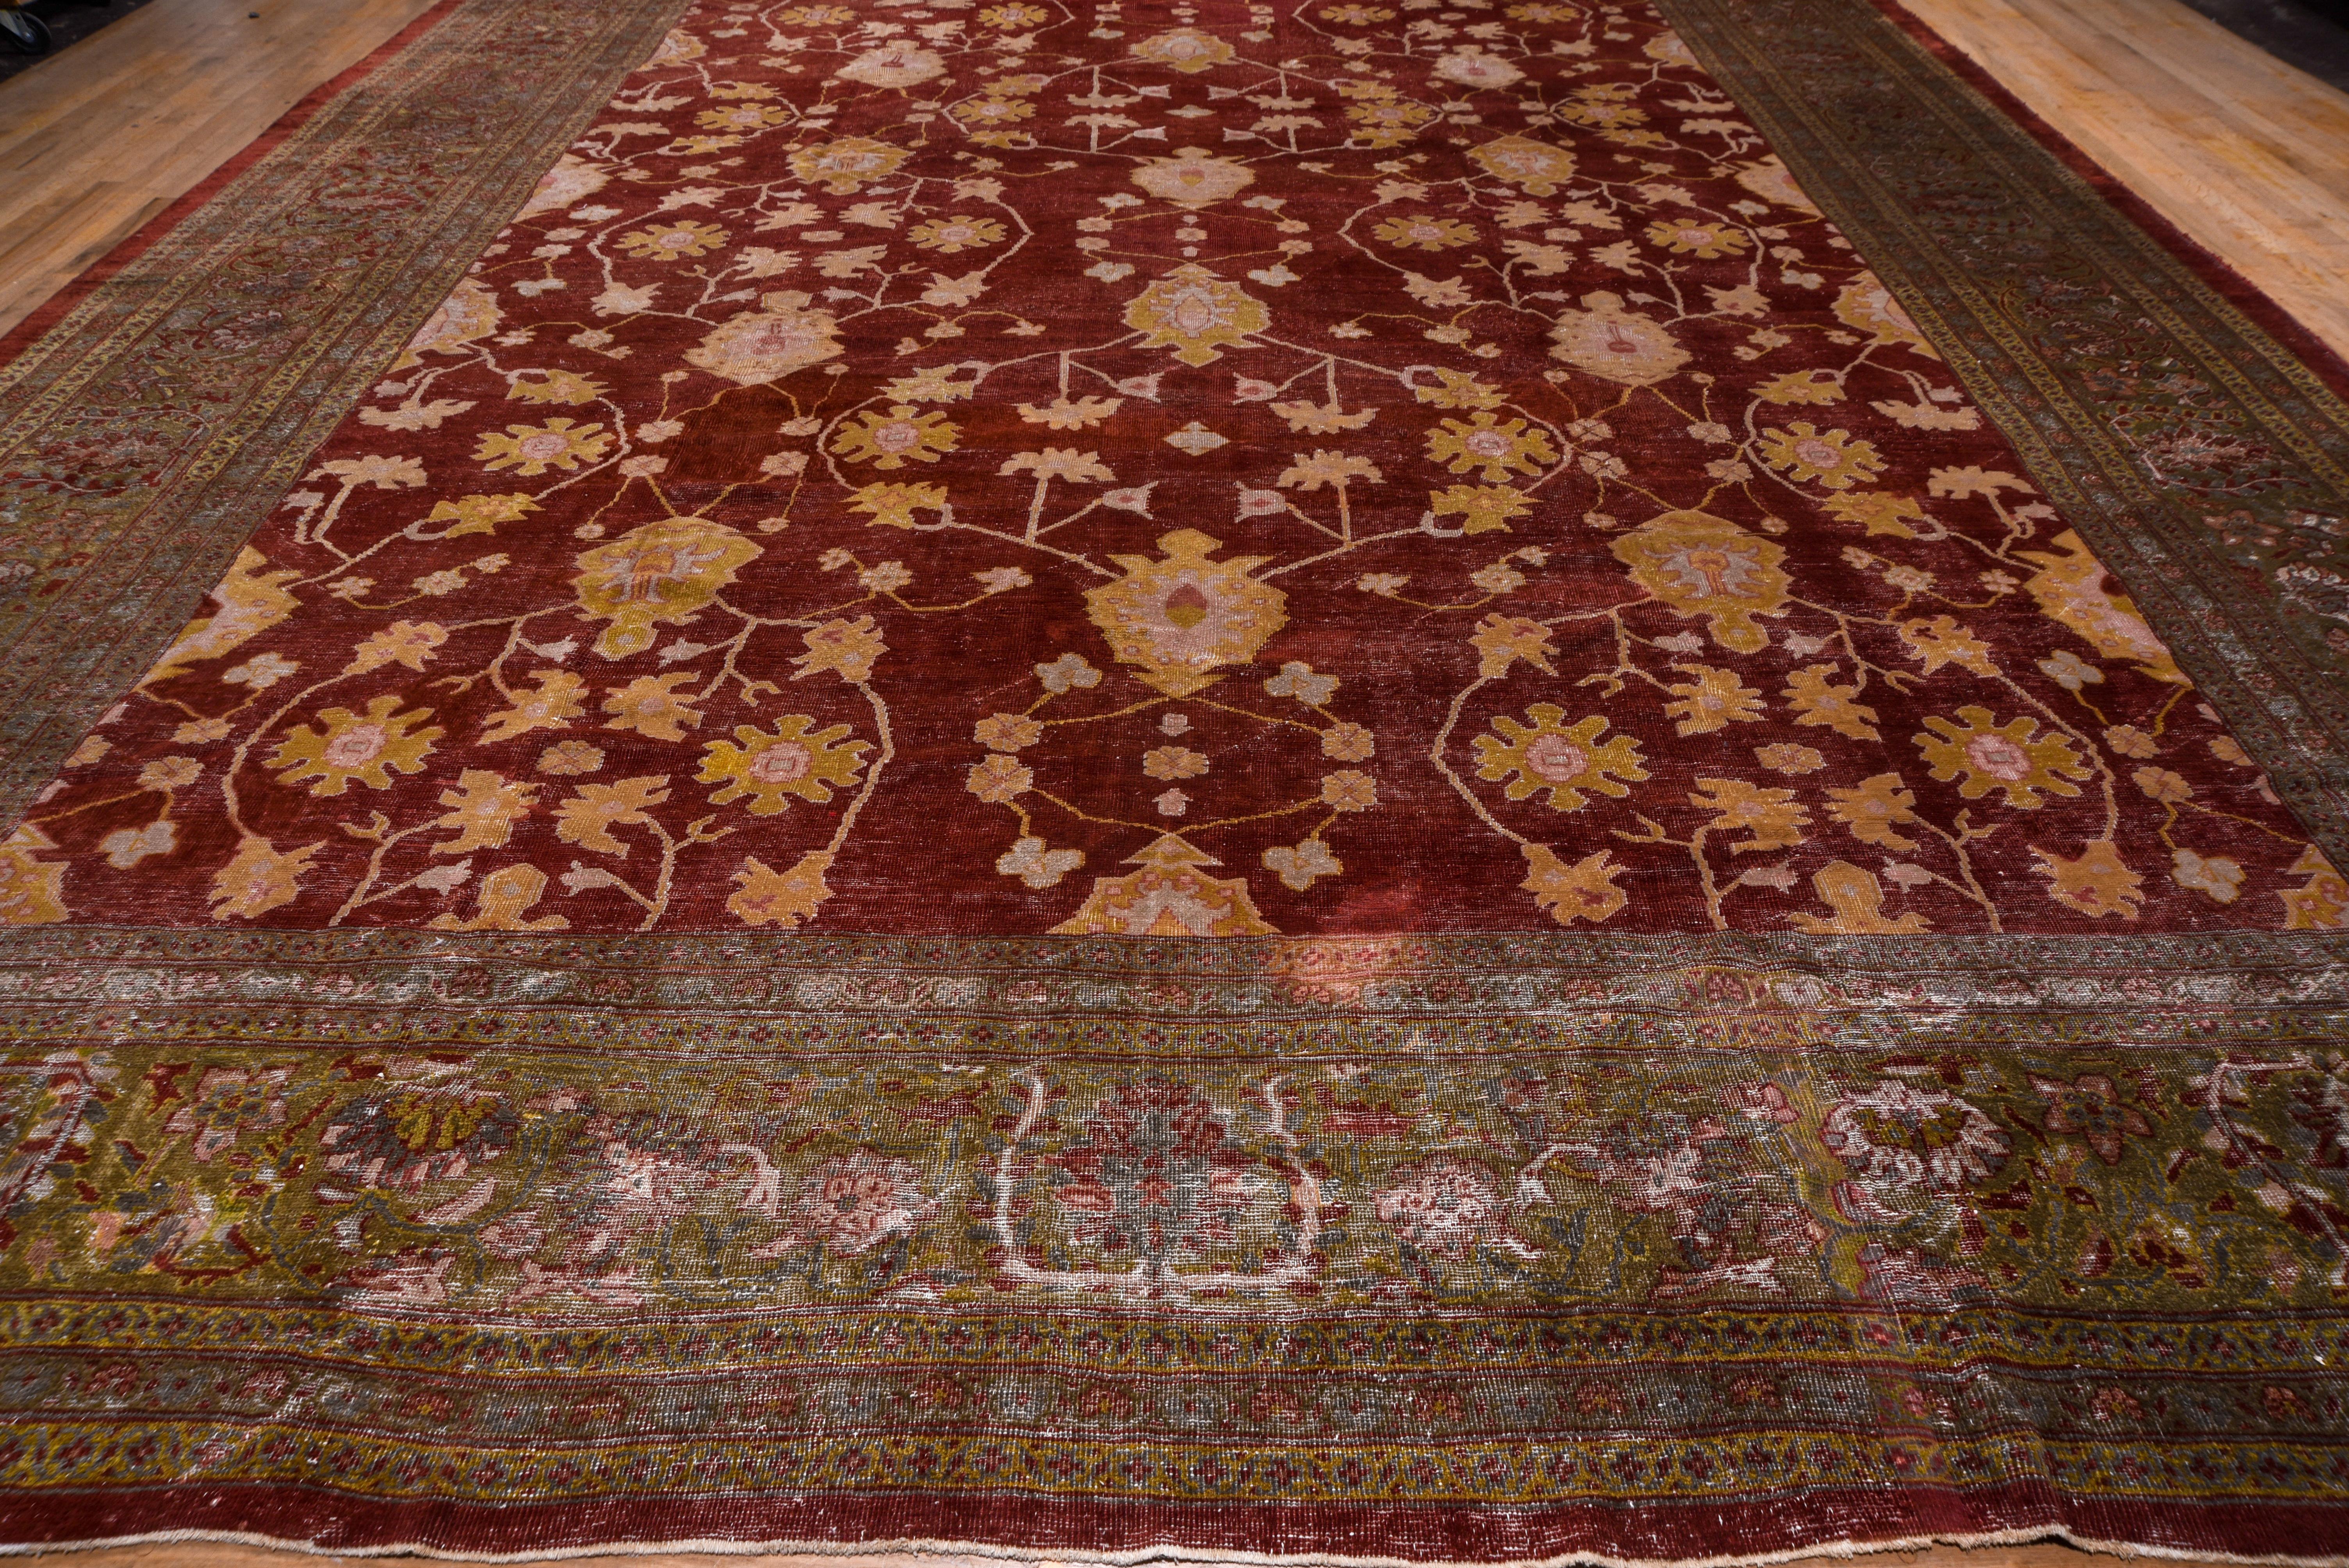 This very attractive, very large west Persian village carpet features a warm madder red field supporting a palmette, cogwheel rosette and curving stem design.